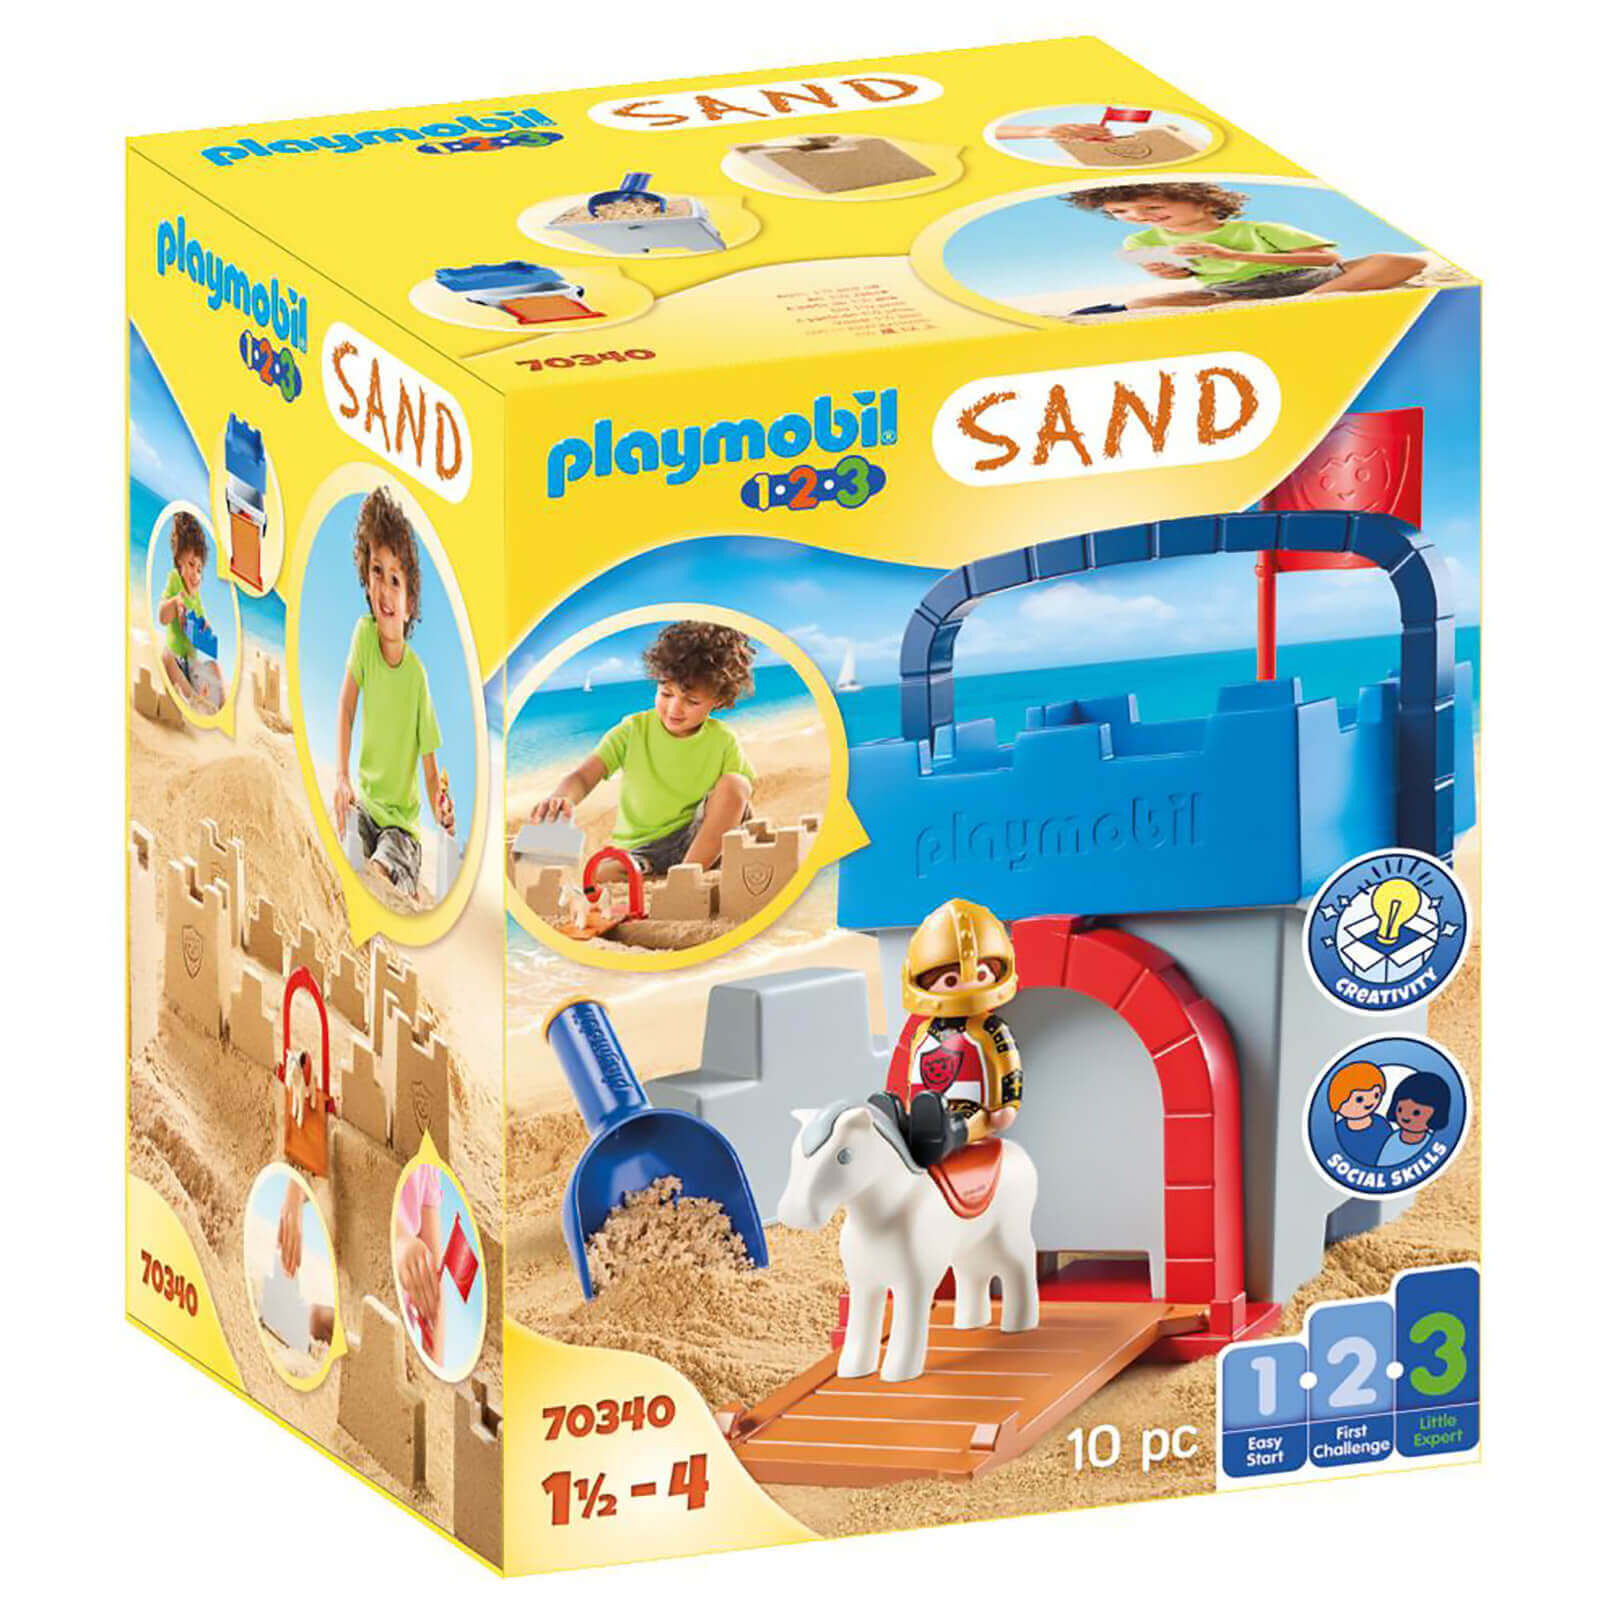 Playmobil SAND Knights Castle Sand Bucket For 18+ Months (70340)